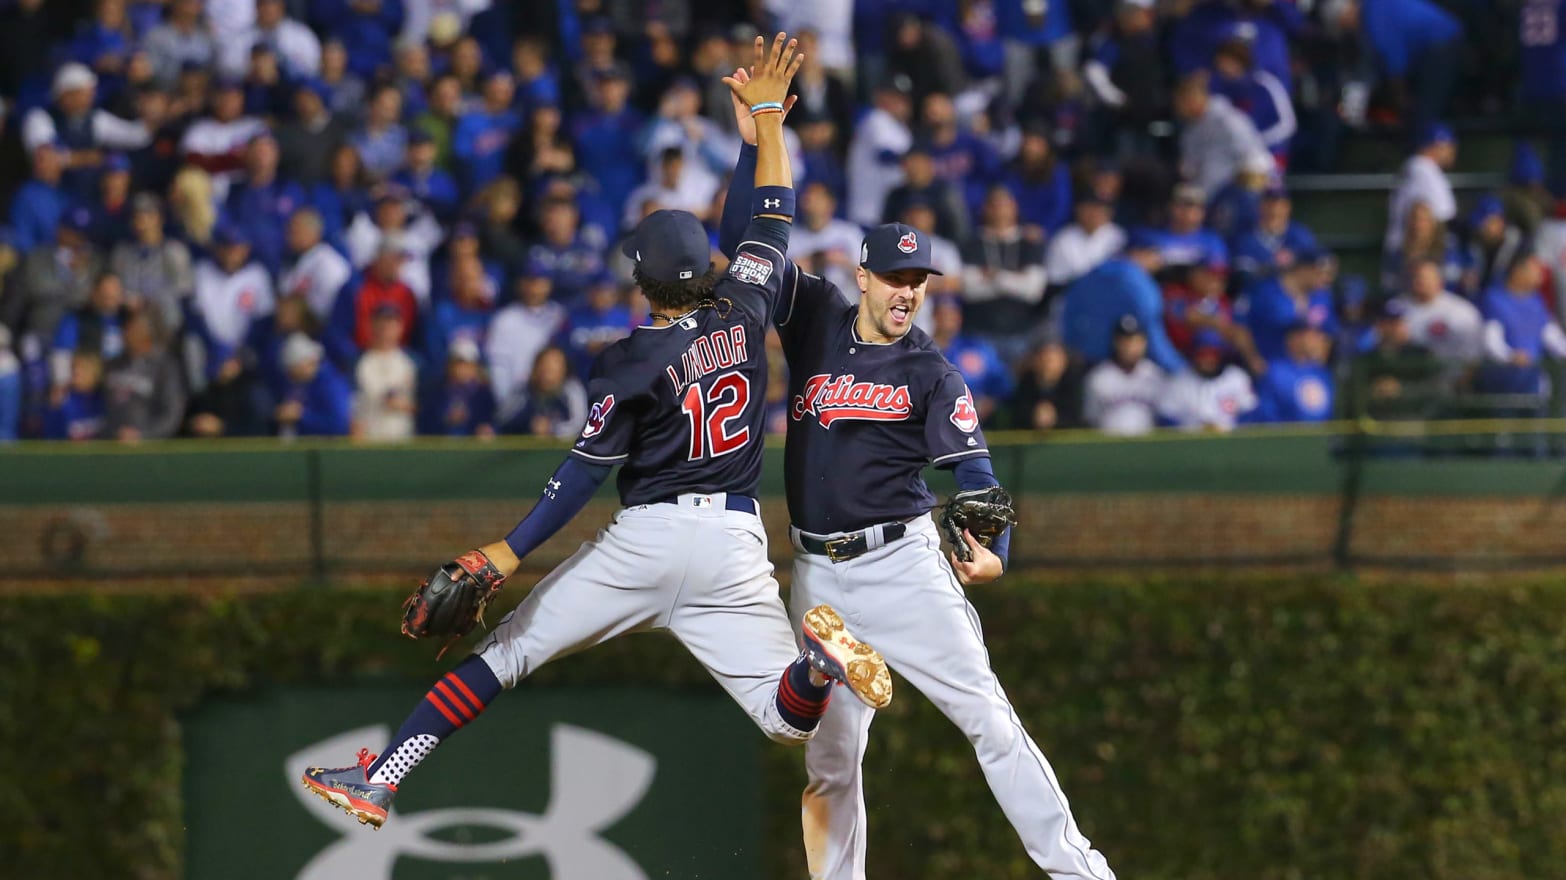 PHOTOS: 2016 MLB World Series, Cubs vs. Indians Game 4